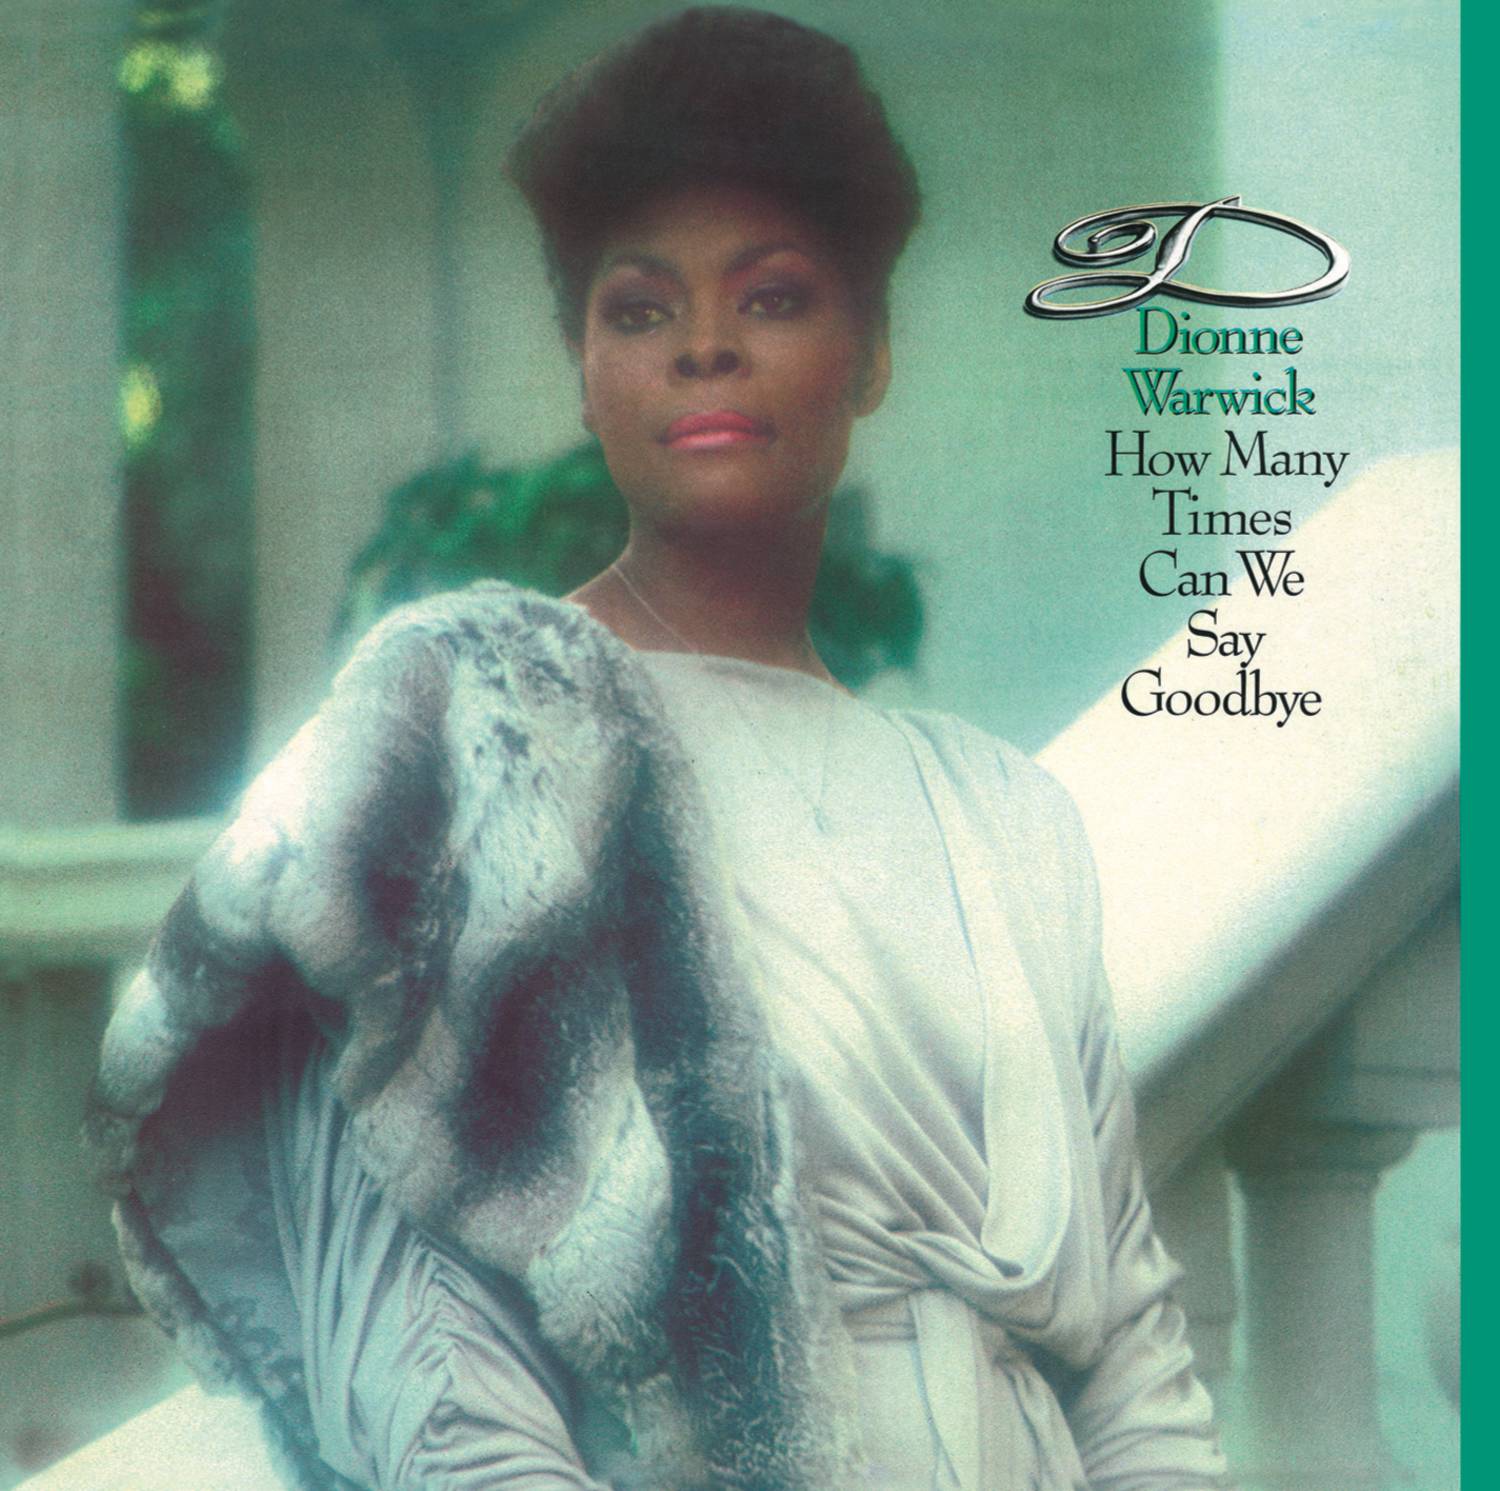 Dionne Warwick - How Many Times Can We Say Goodbye (1983/2015) {Expanded Edition 2014} [AcousticSounds FLAC 24bit/96kHz]